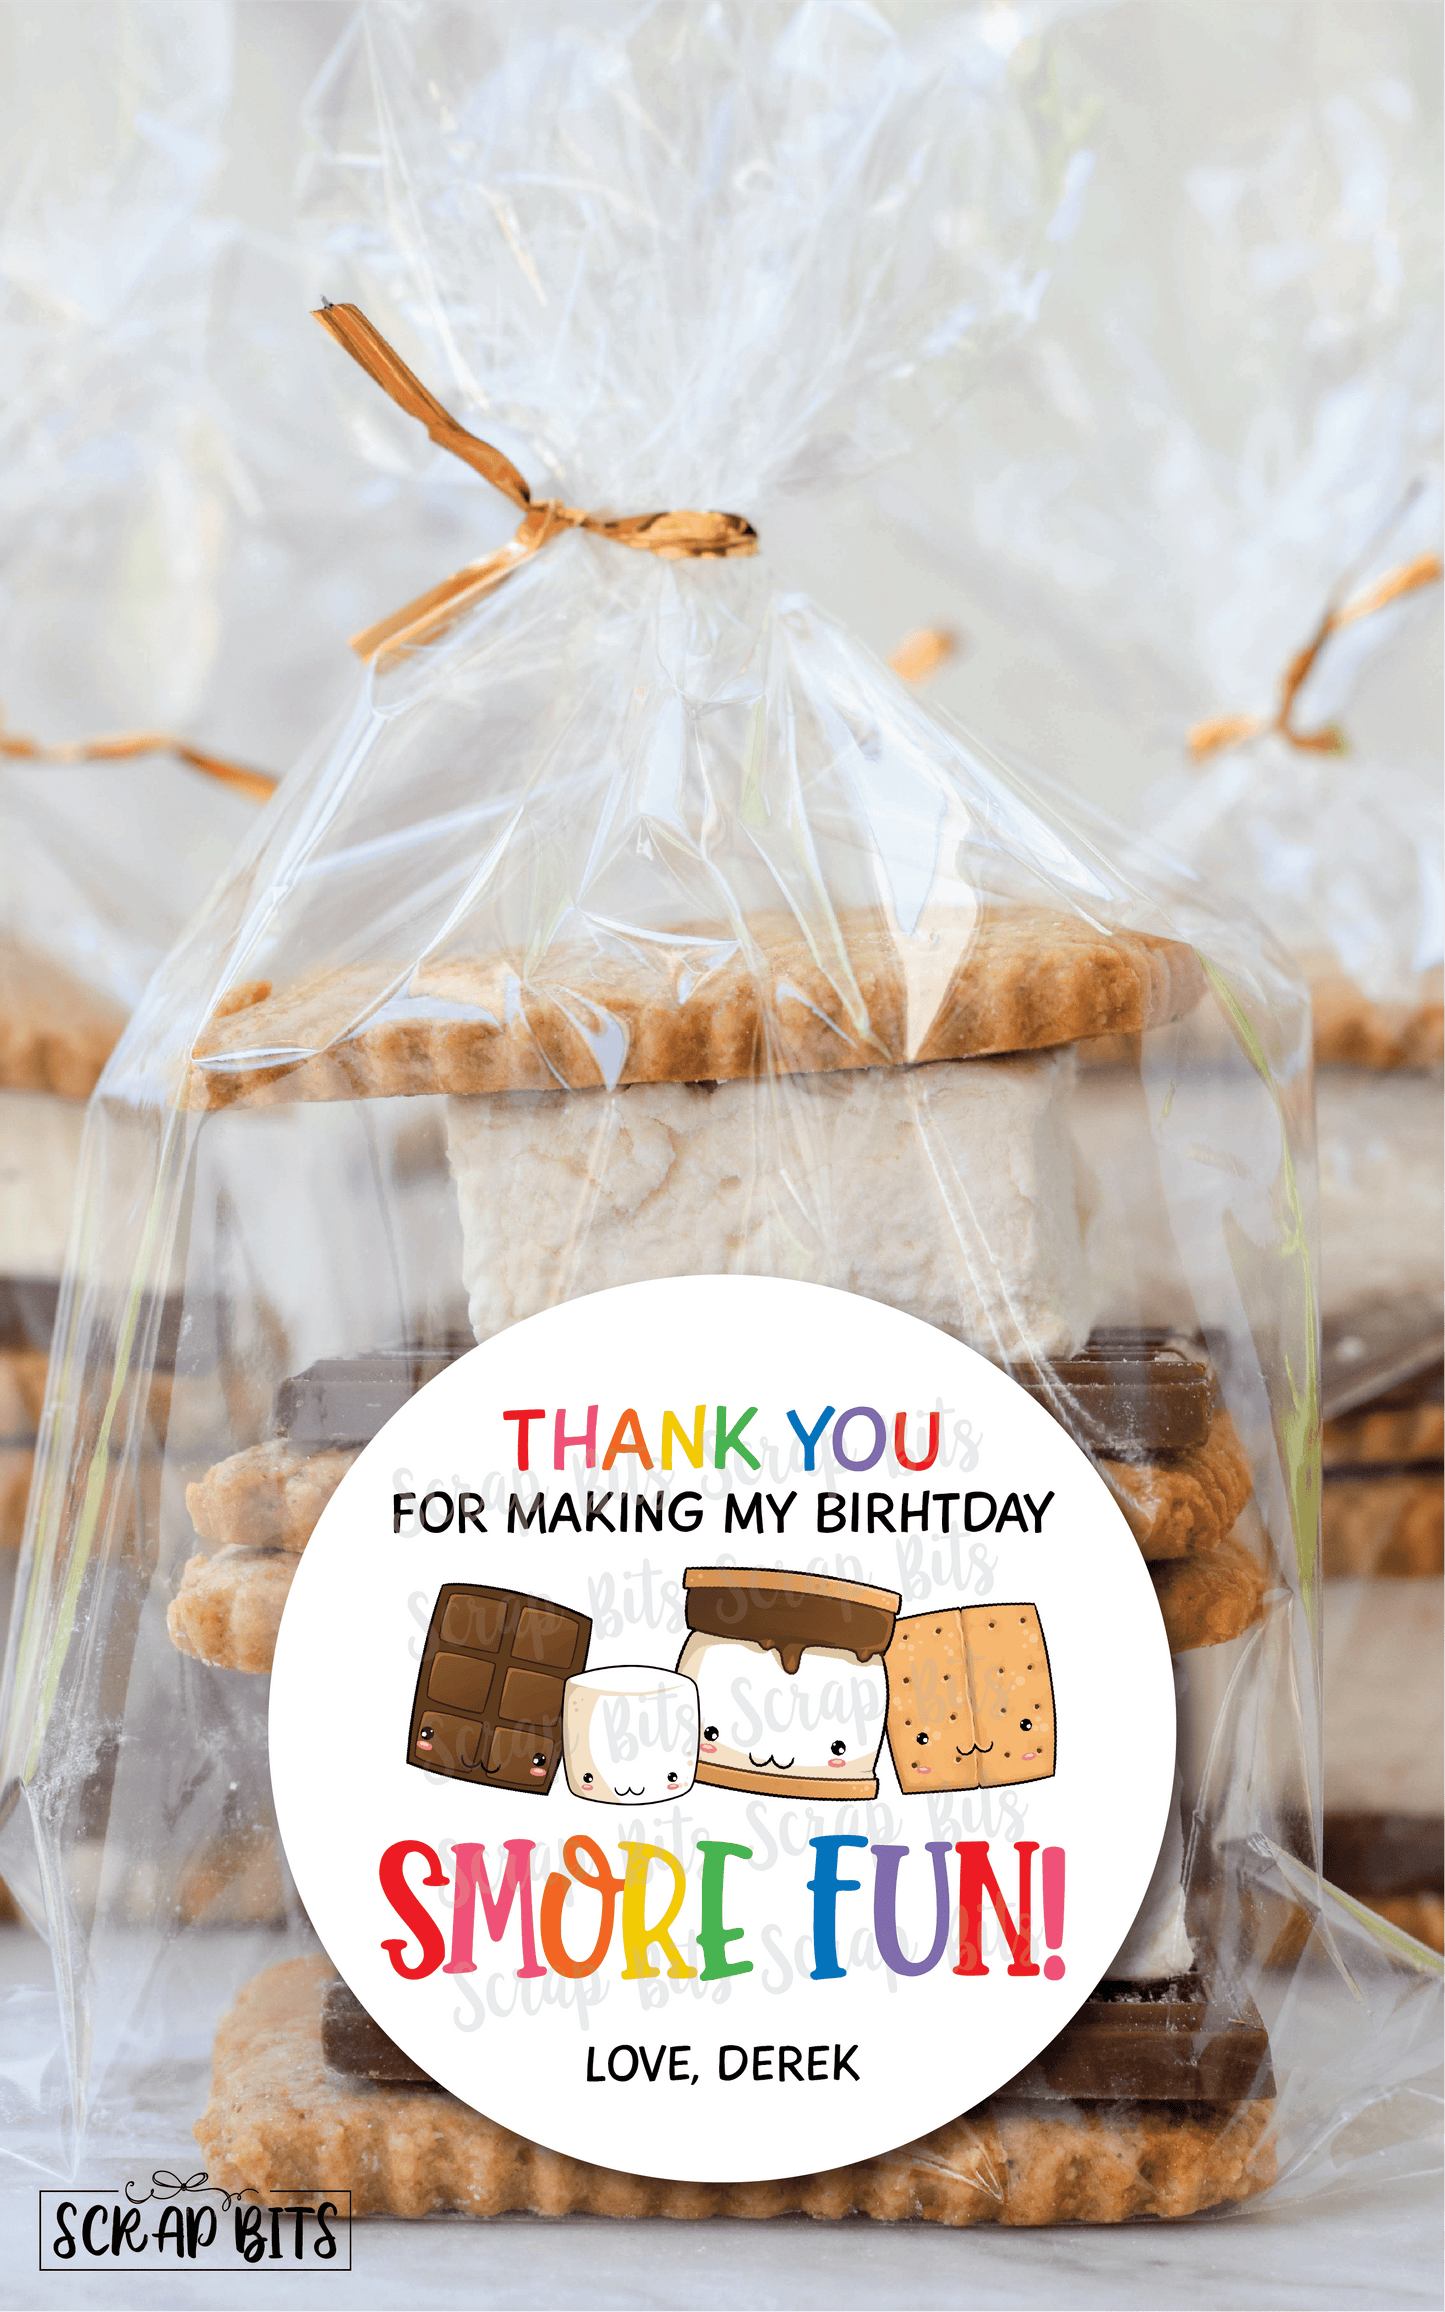 Birthday Smore Fun Stickers, Rainbow . Smores Birthday Party Favor Stickers or Tags - Scrap Bits